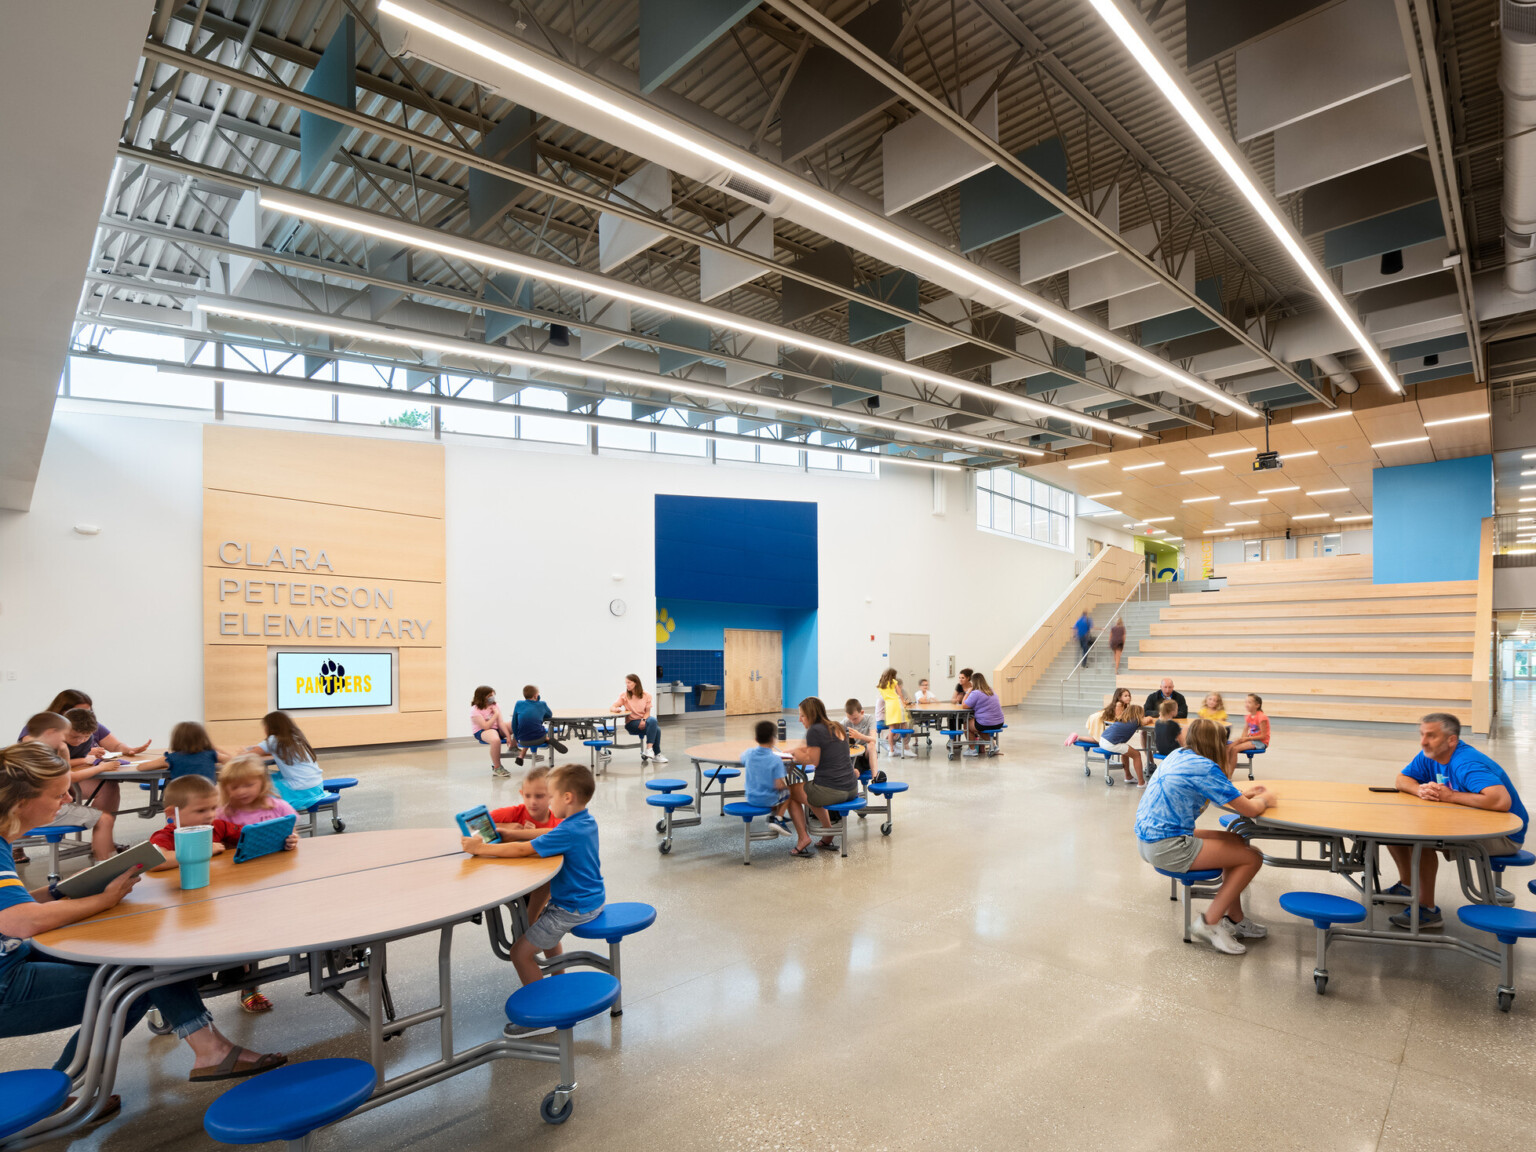 Double height cafeteria common space with flexible seating and tables, learning stairs to second floor